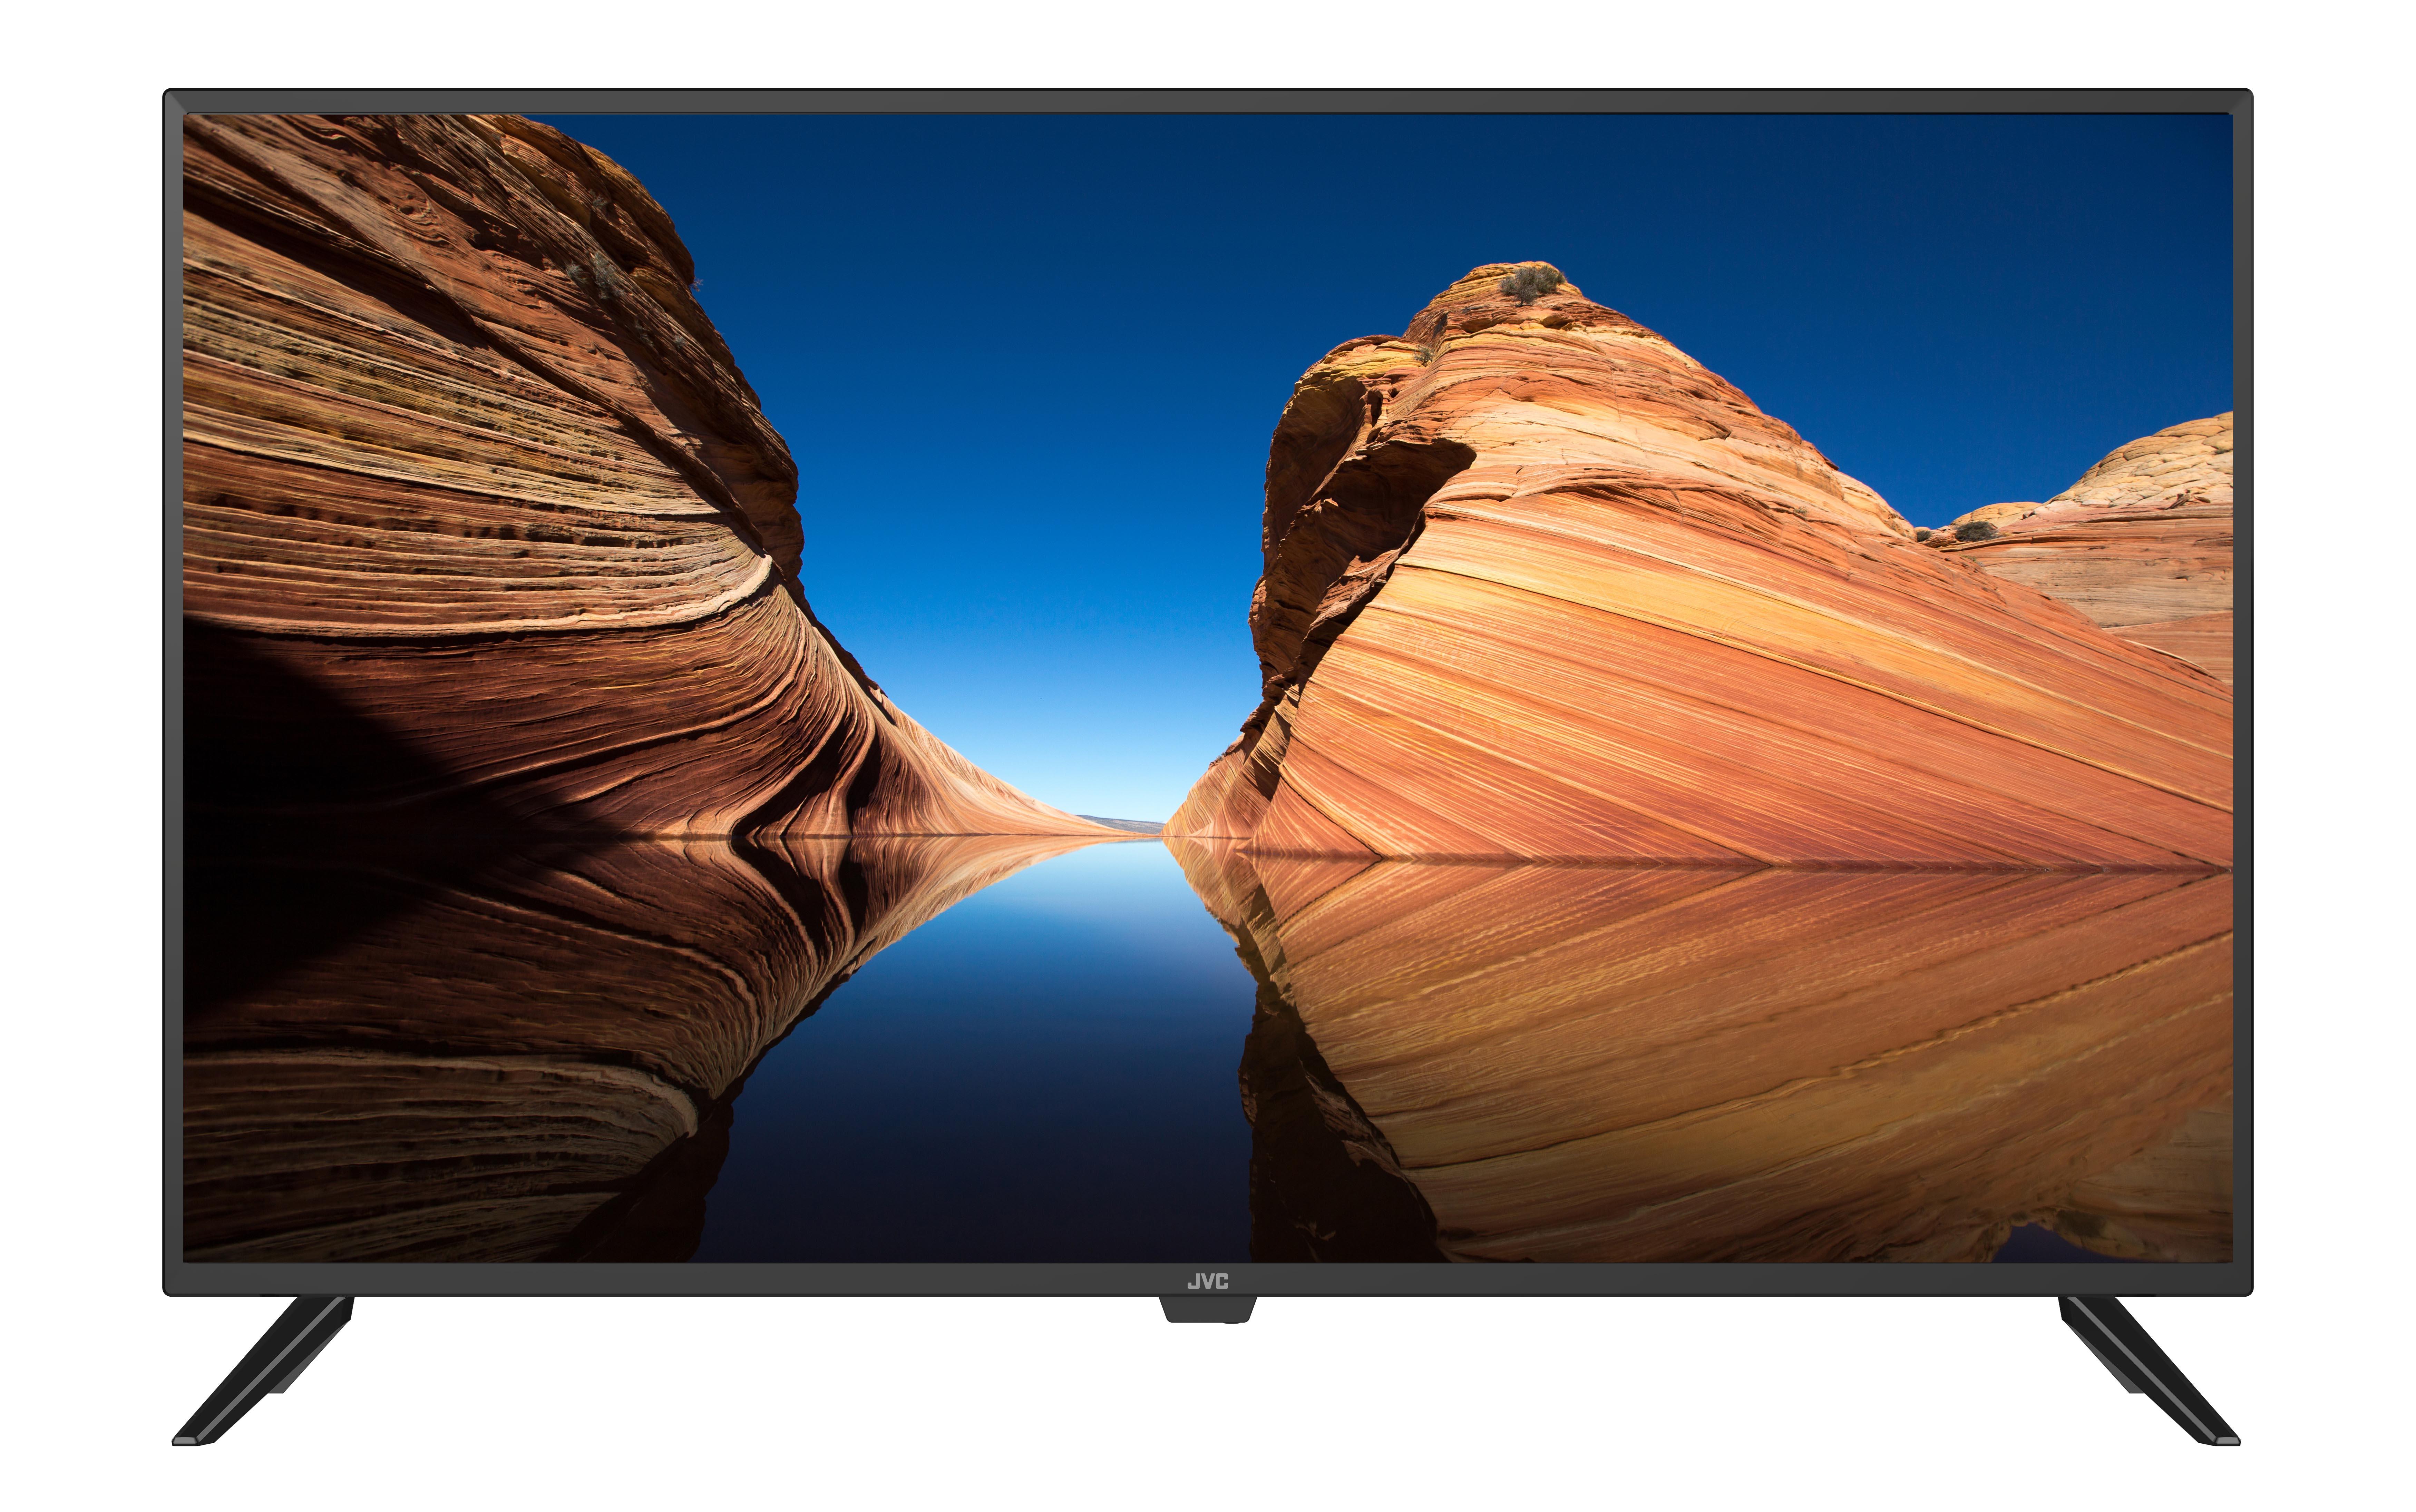 43in JVC LT-43MAW400 1920x1080 FHD LED TV for $128 Shipped